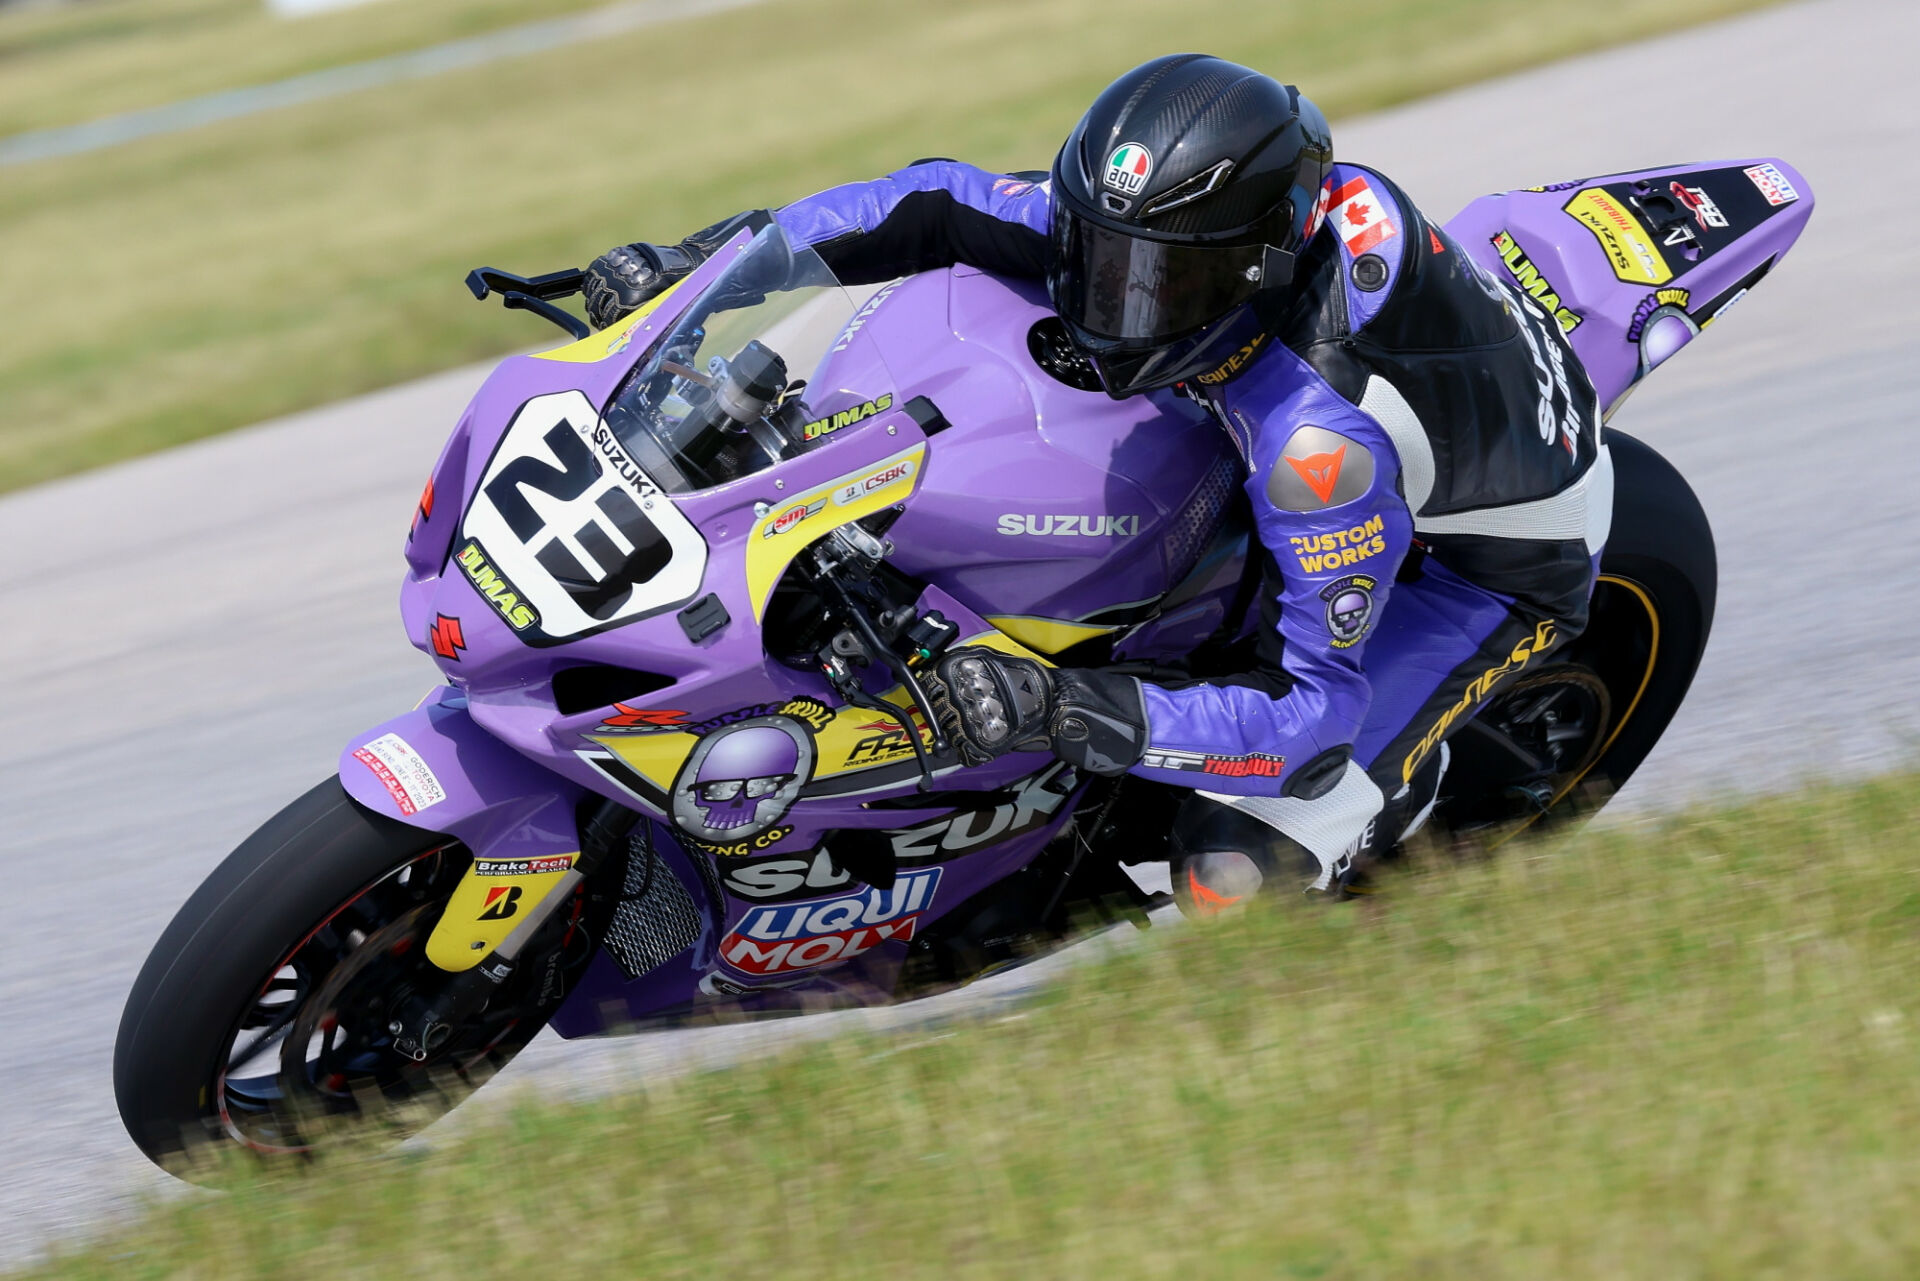 Alex Dumas (23) leads the Bridgestone Canadian Superbike Championship into round three of the season, sitting at the top of the standings with a 36 point lead over defending champ Ben Young. Photo by Rob O'Brien, courtesy CSBK.